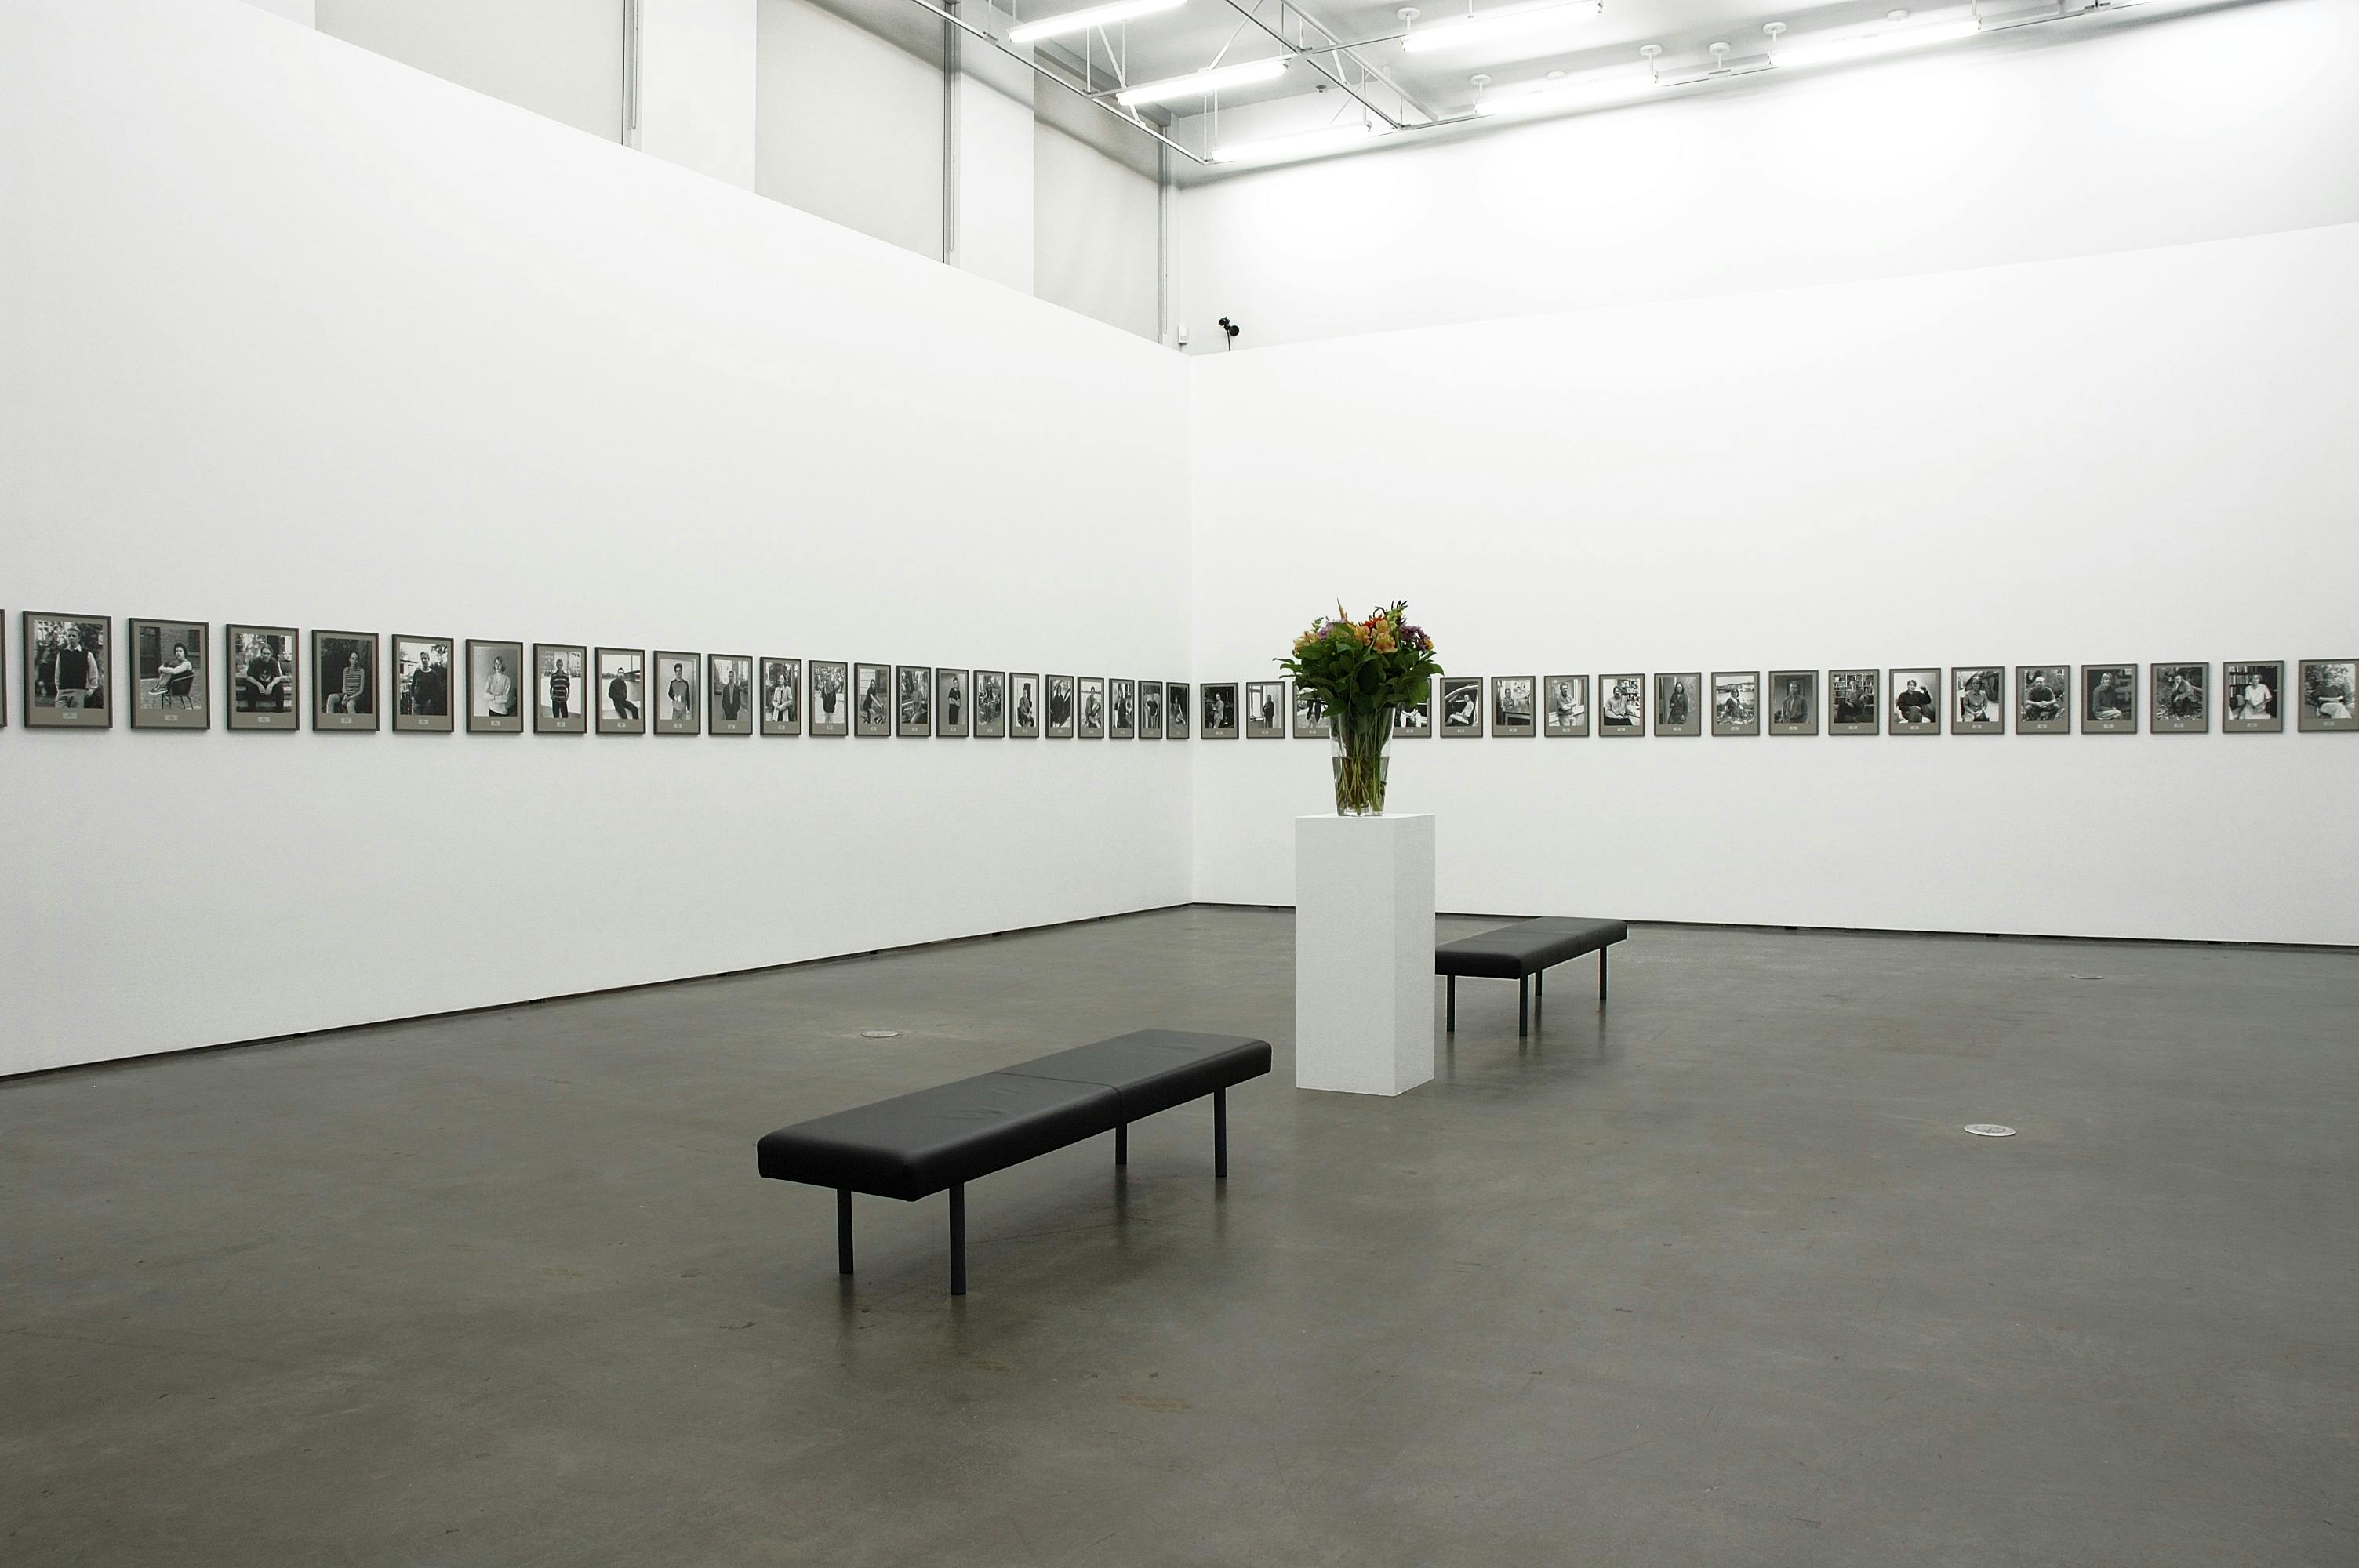 In a gallery, there are dozens of framed black and grey photos on the walls. At the centre of the space, there is a white plinth with pink flowers, with small black benches on either side of it.